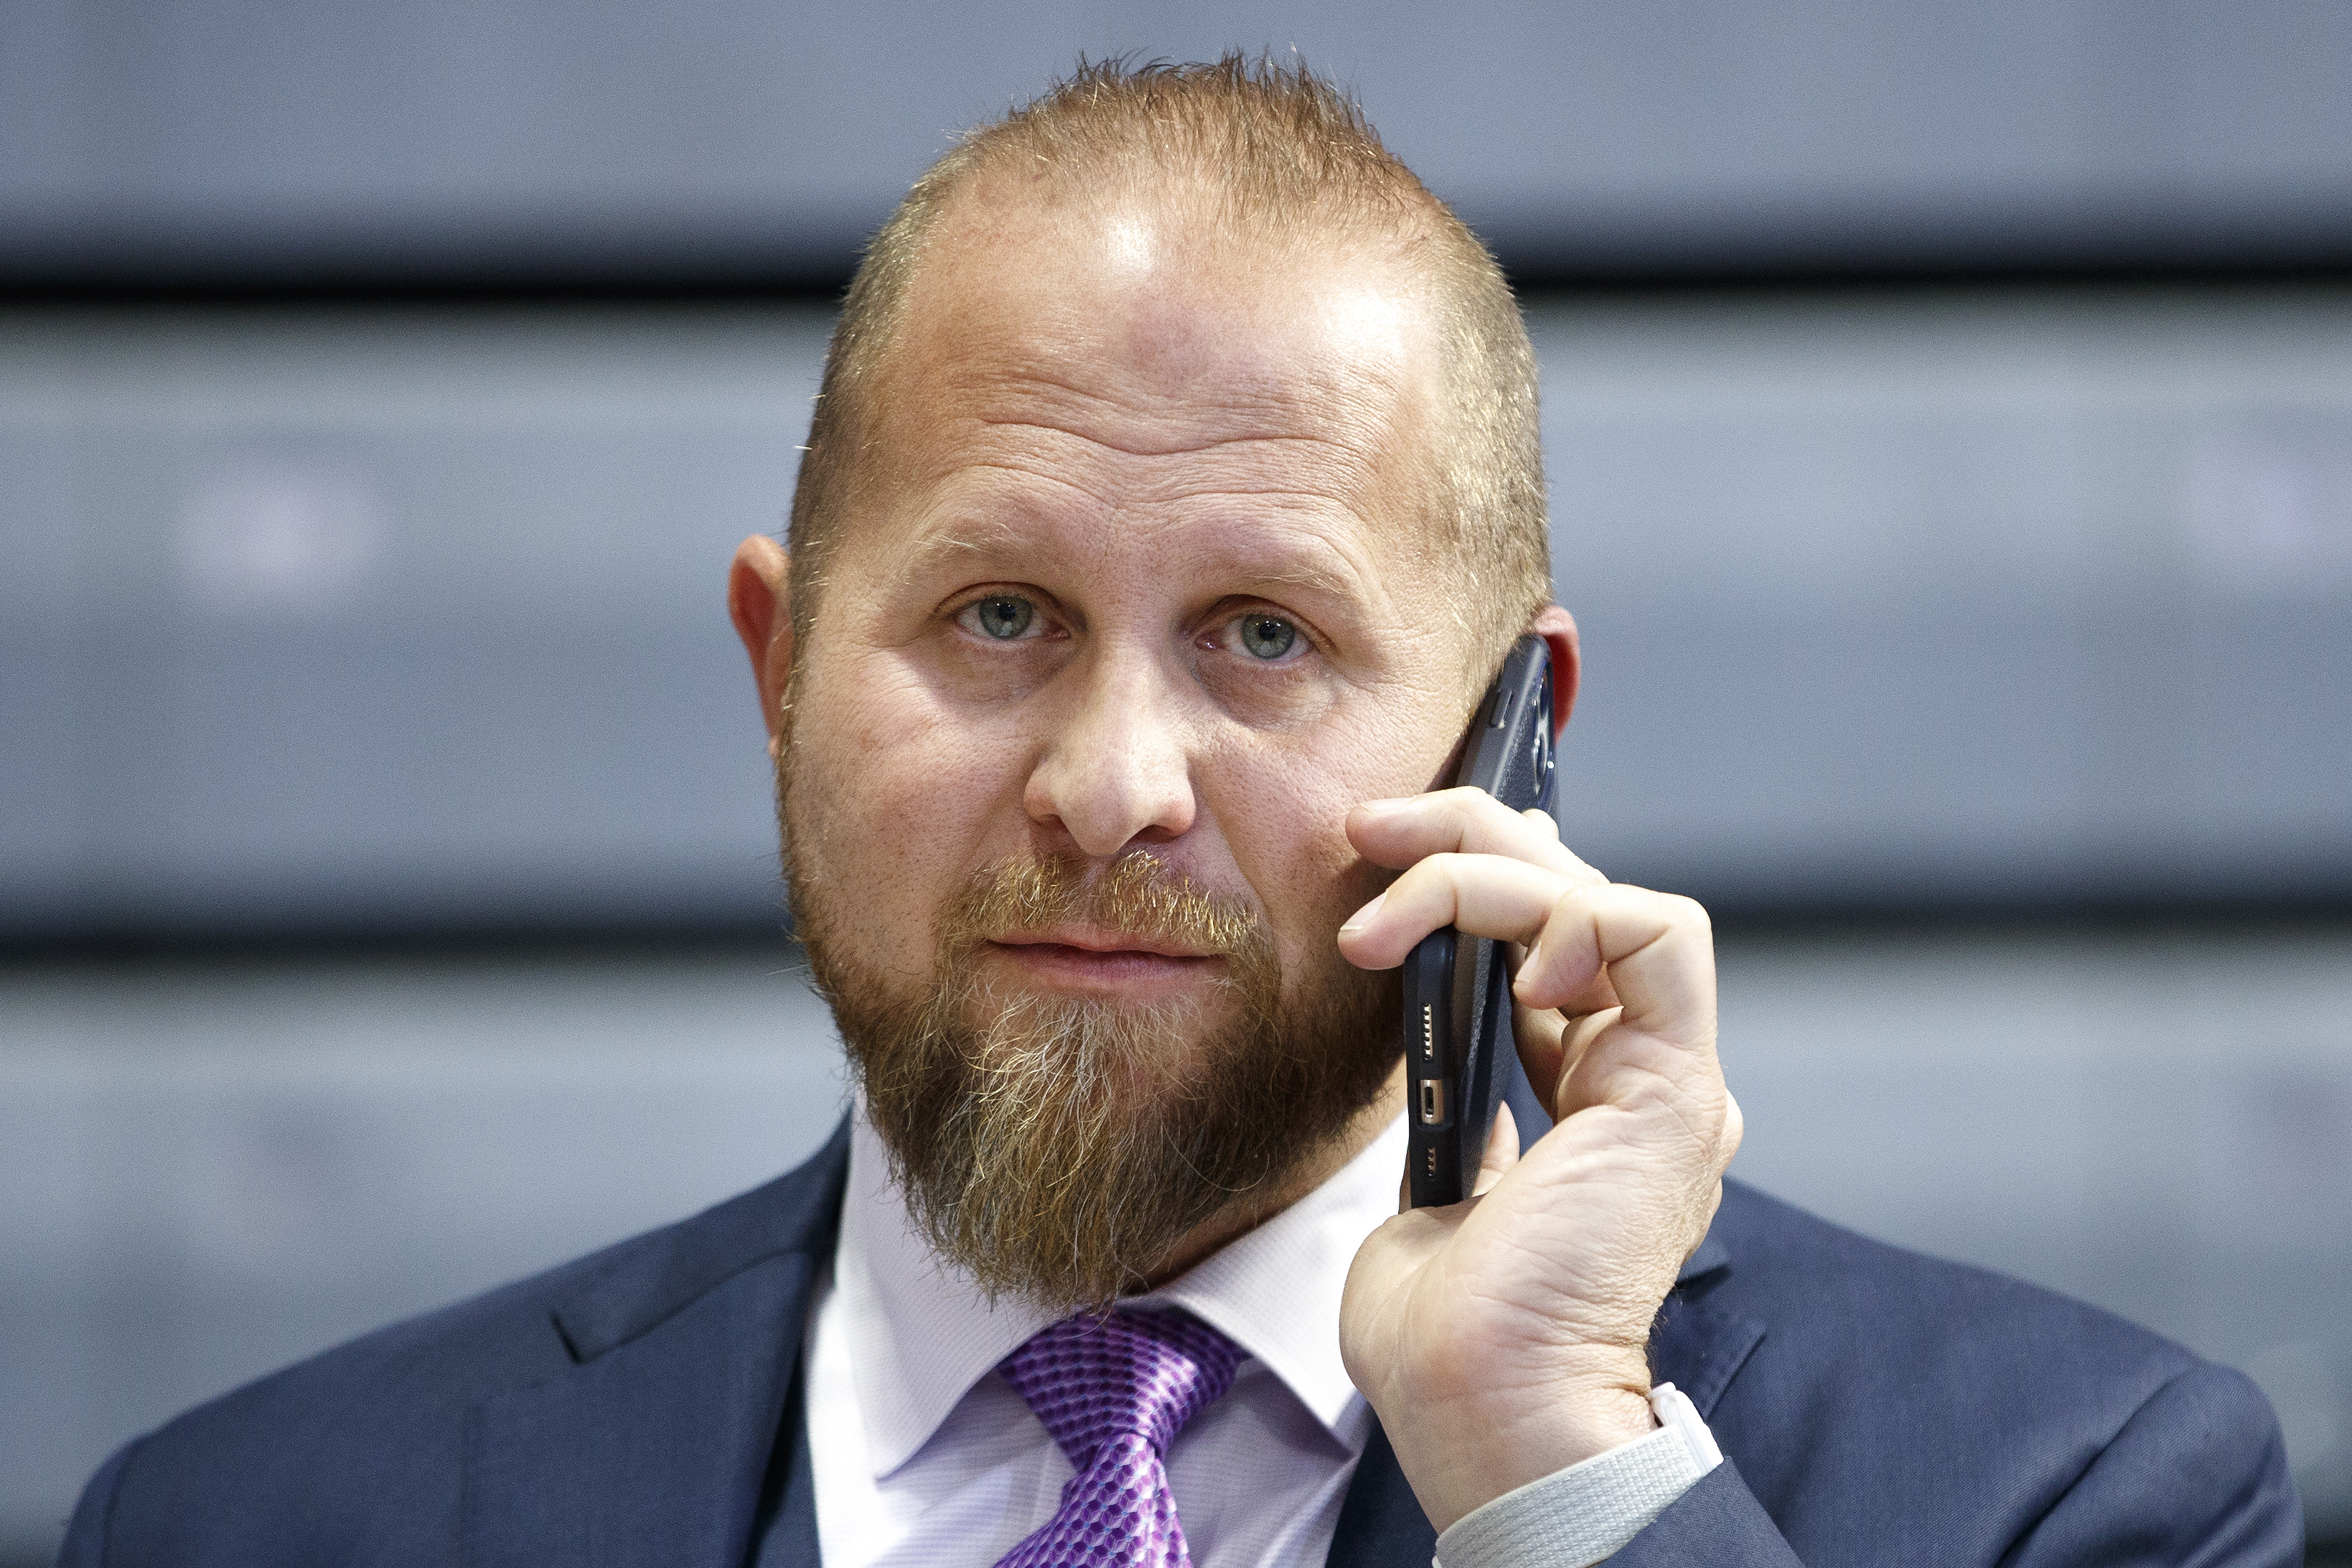 Trump Replaces Campaign Manager Brad Parscale Amid Sinking Poll Numbers - The Boston Globe